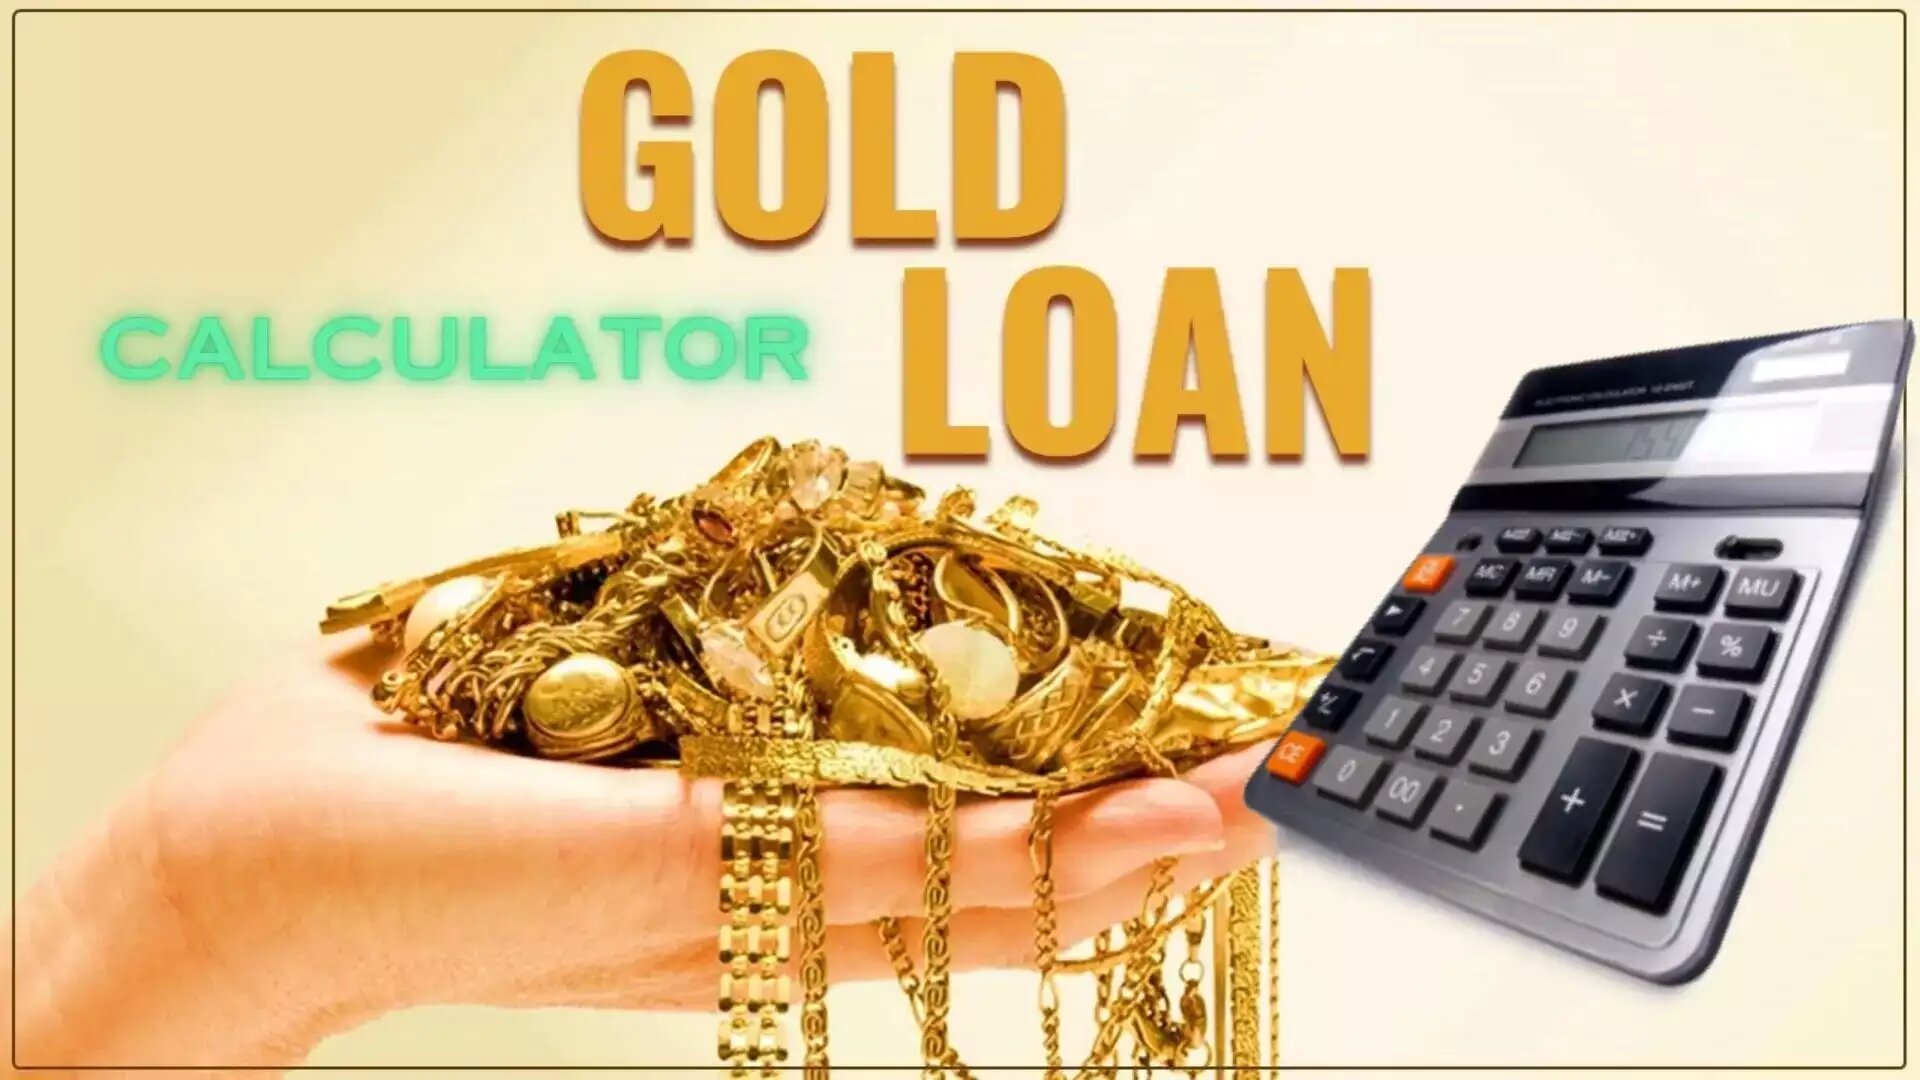 Simplifying Borrowing: Gold Loan Calculators and Online Personal Loans